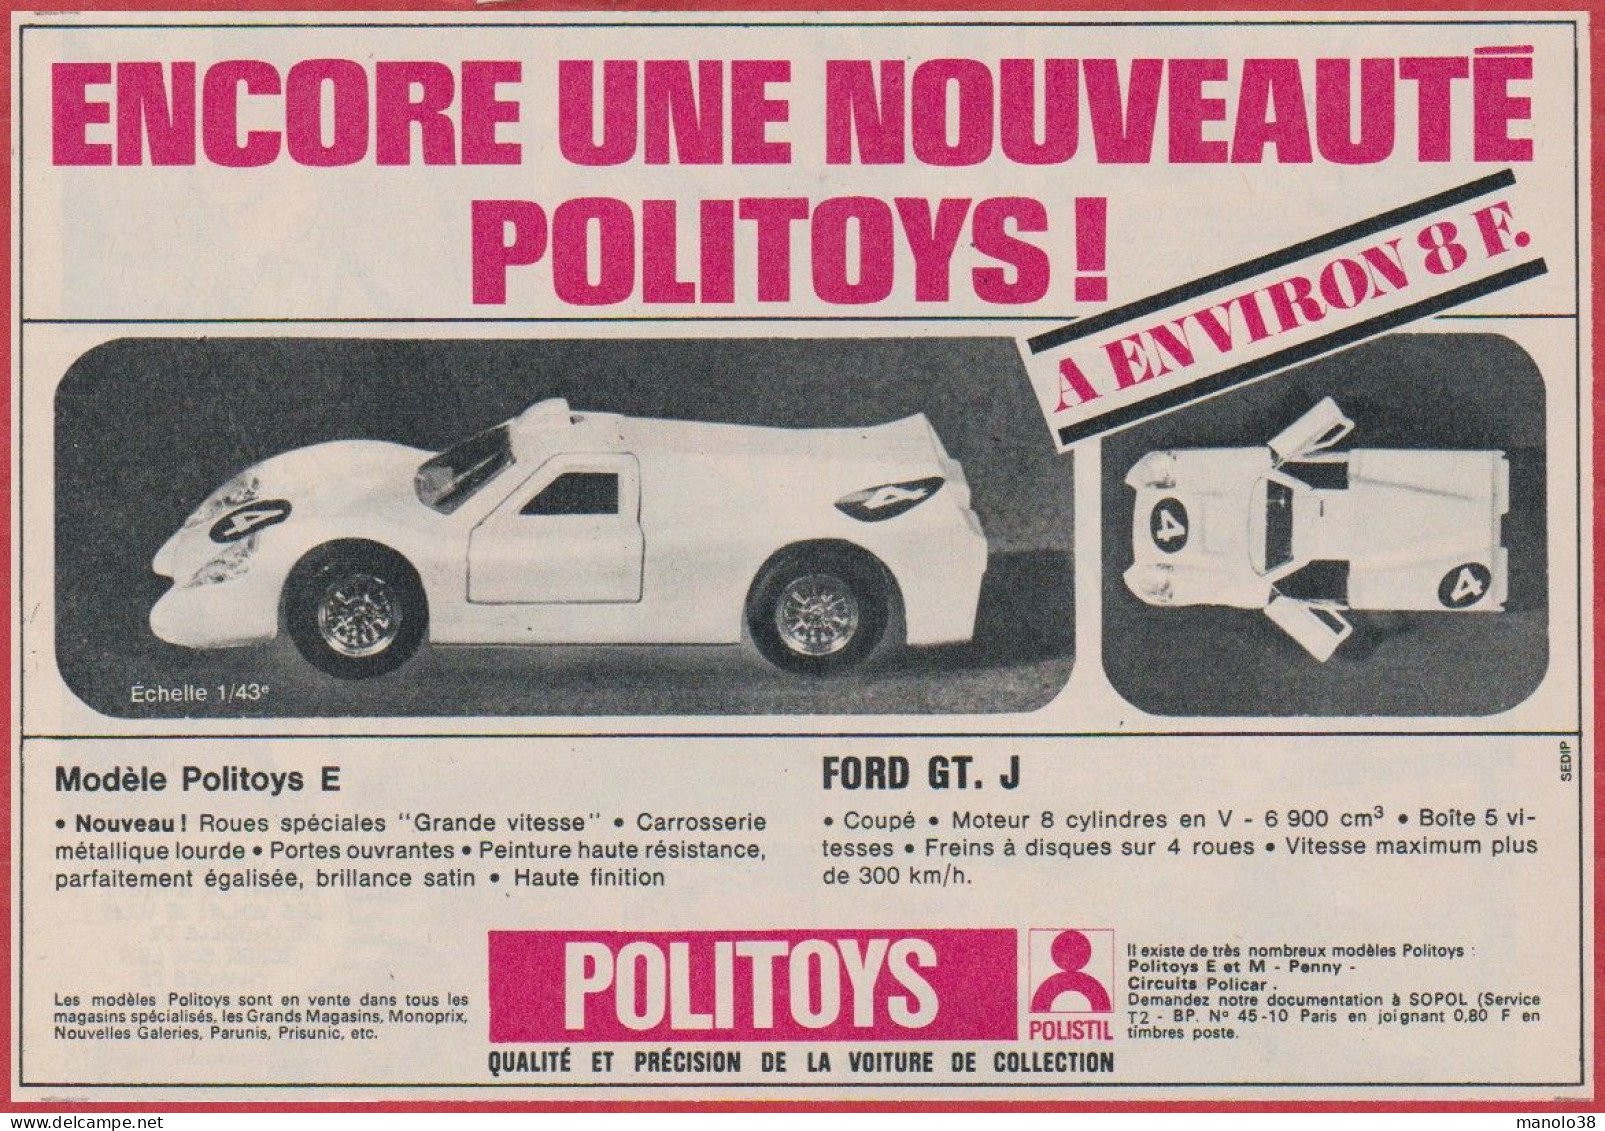 Ford GT J. Politoys. Voiture De Collection Miniature. 1970. - Advertising